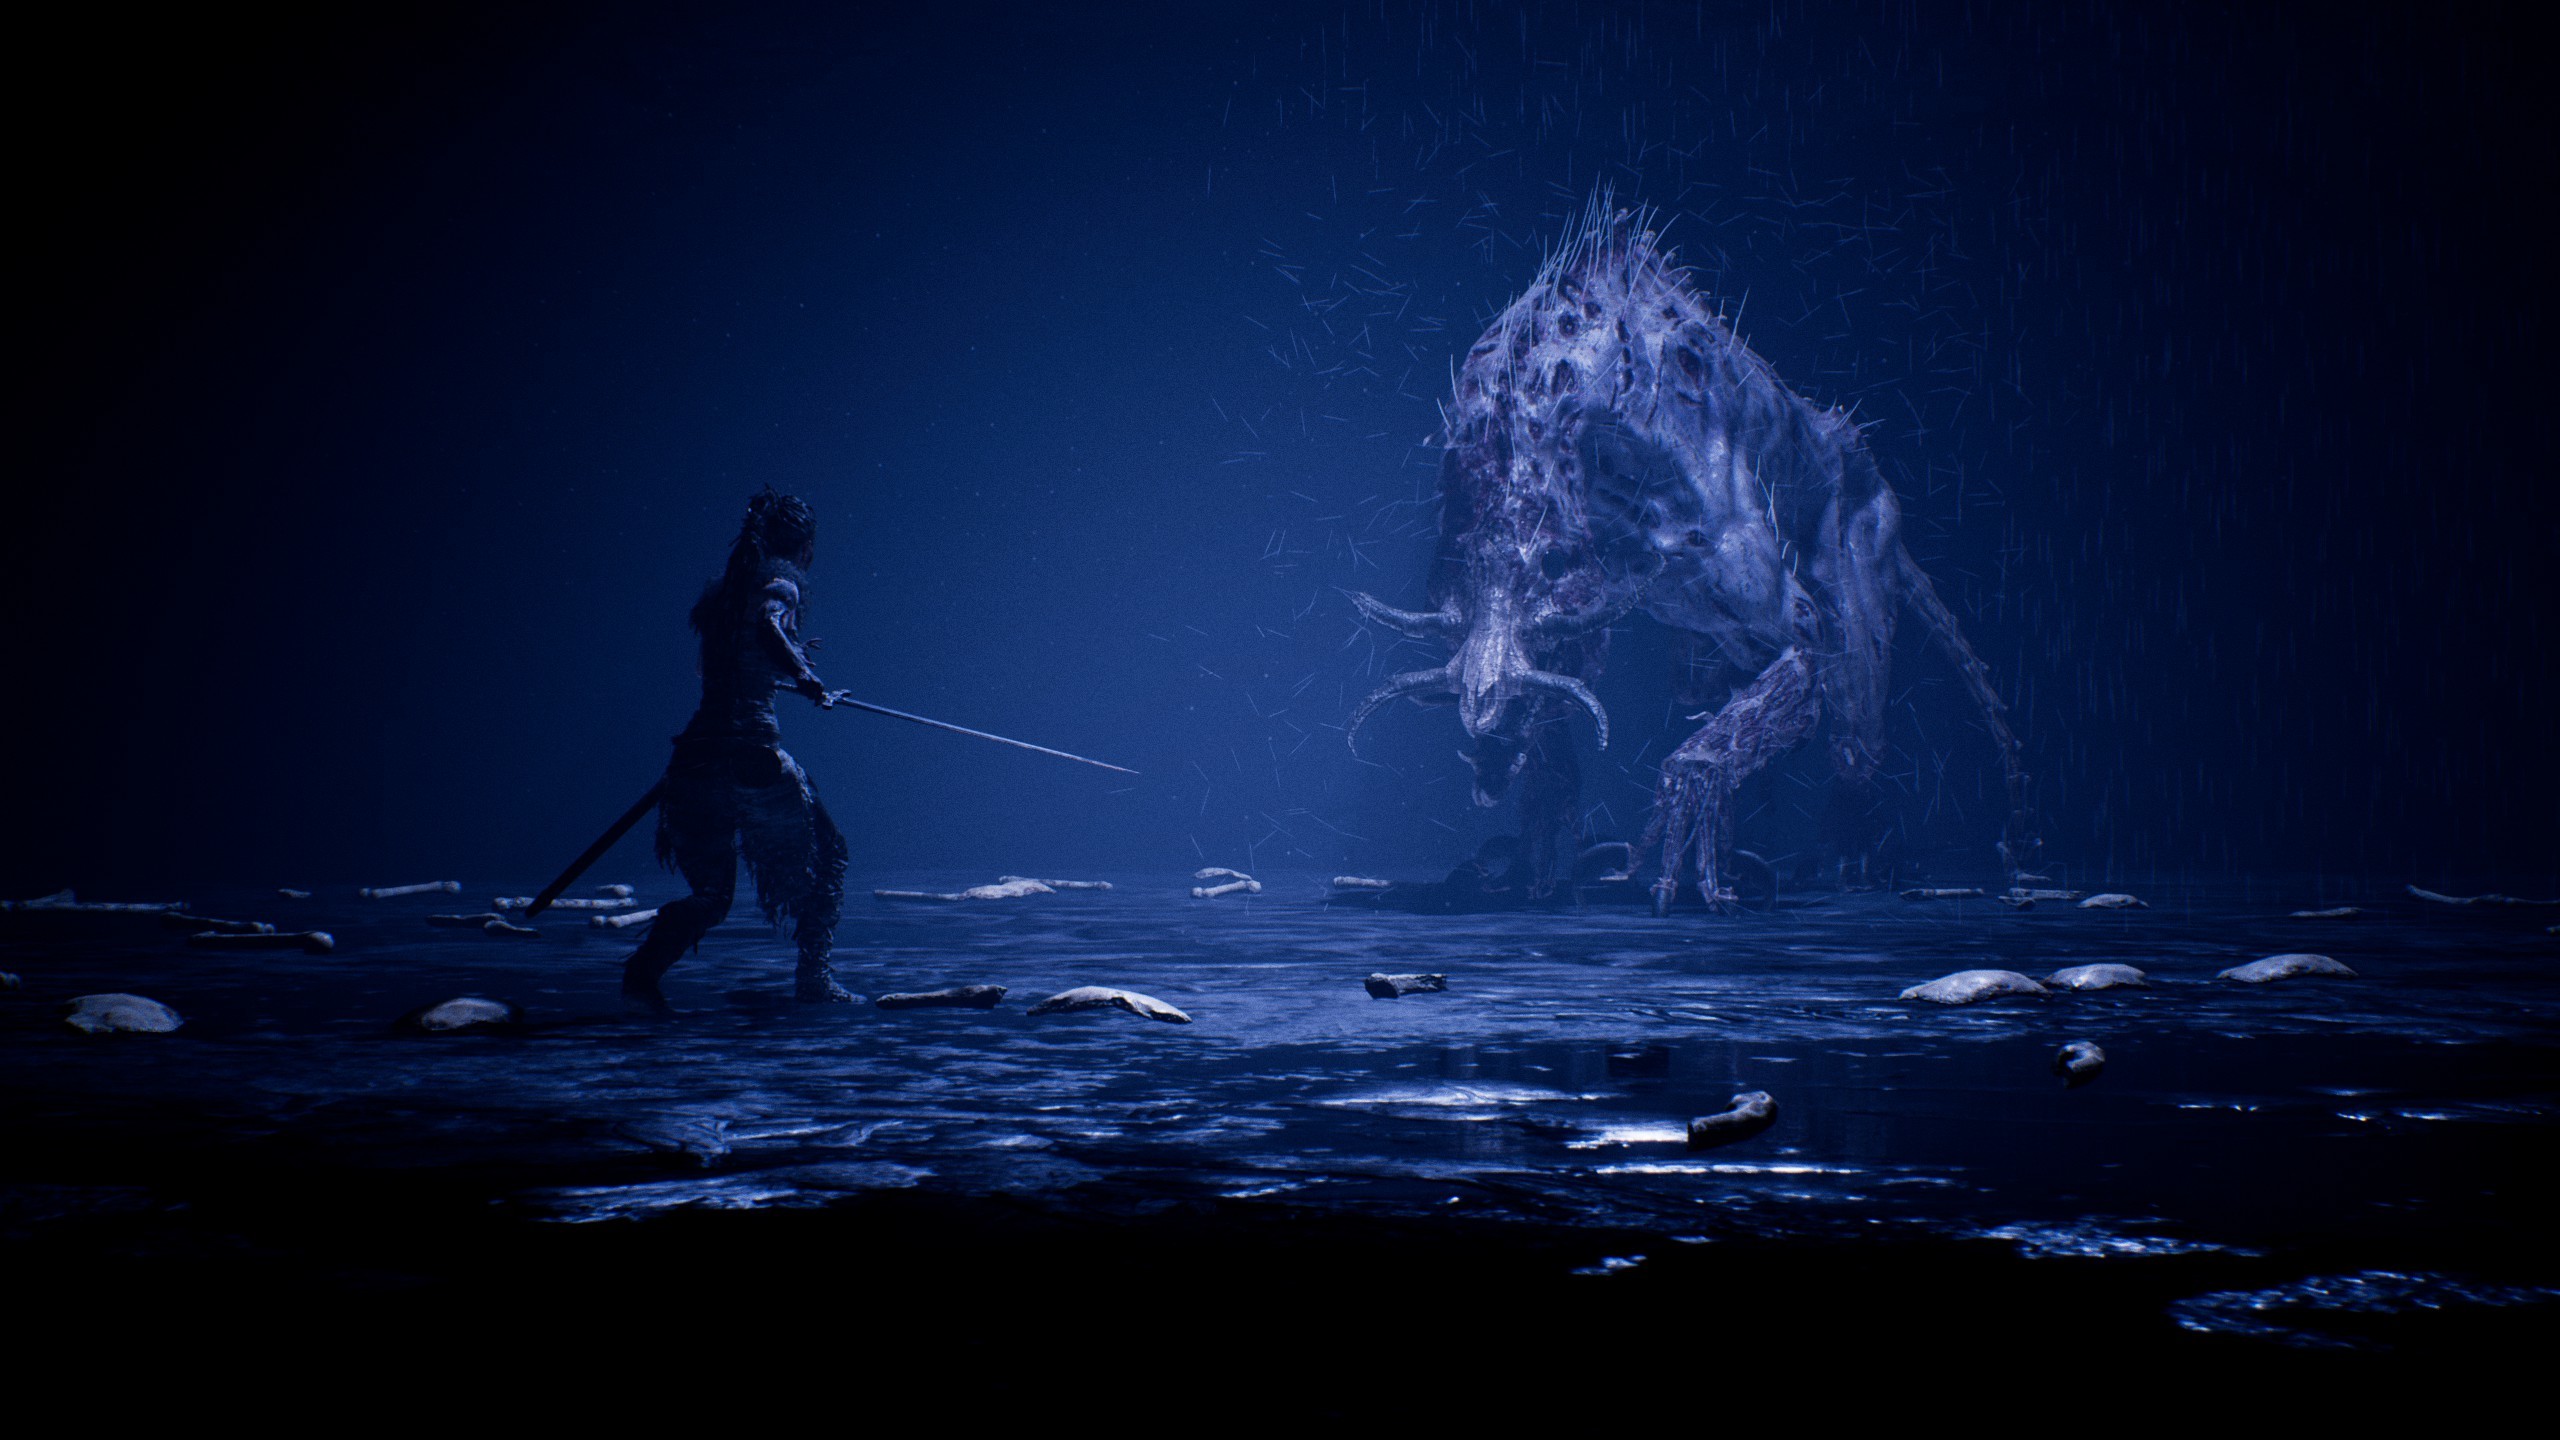 2560x1440 Here is a kickass wallpaper of a shot I took during Hellblade. (slight  spoilers for a bossfight).